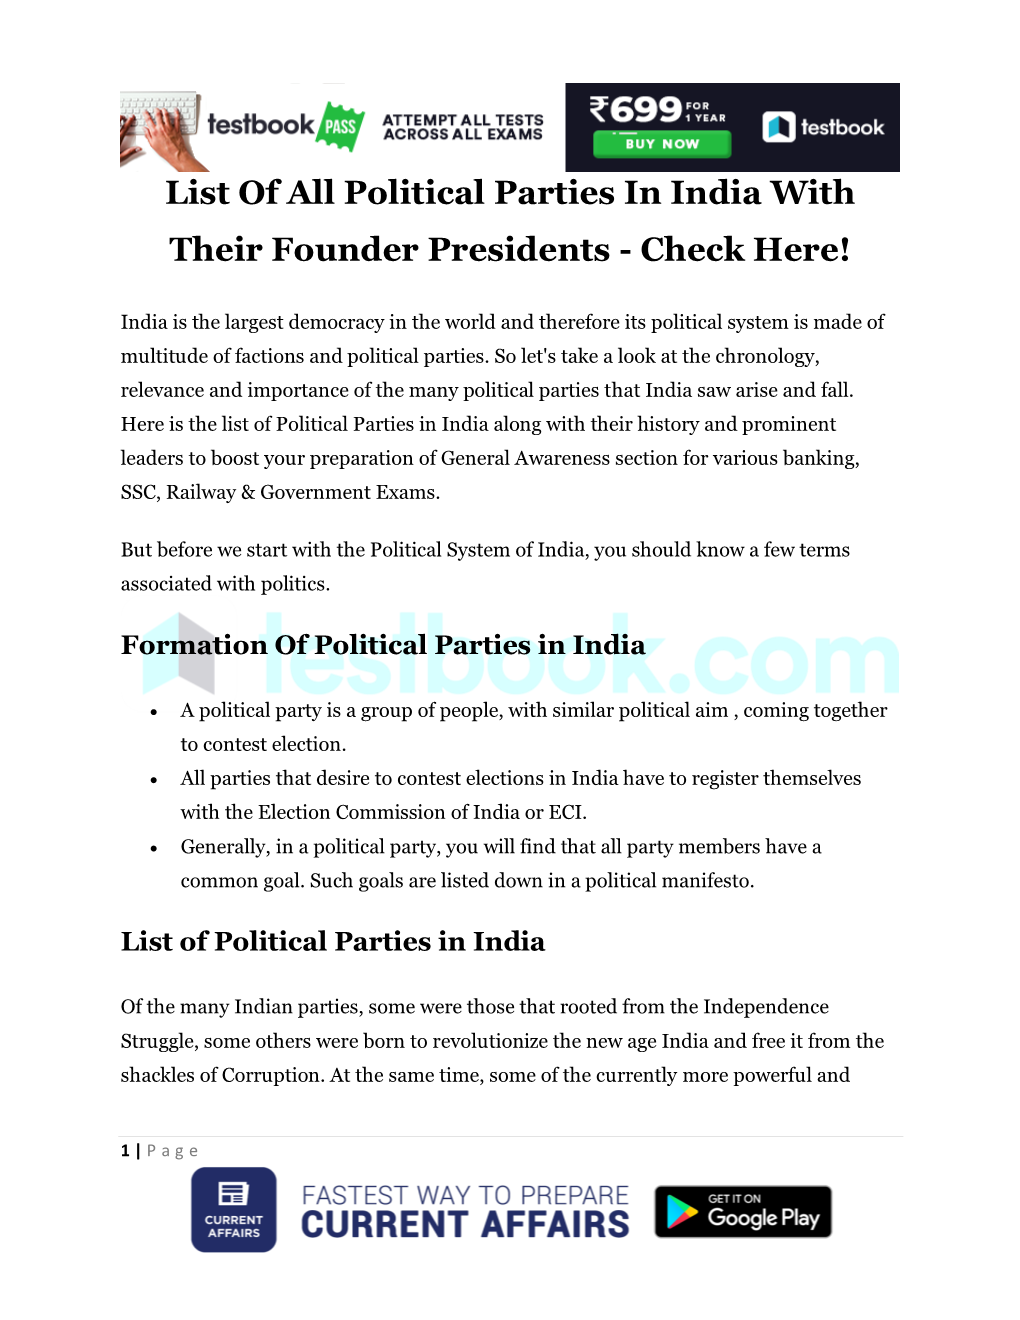 List of All Political Parties in India with Their Founder Presidents - Check Here!